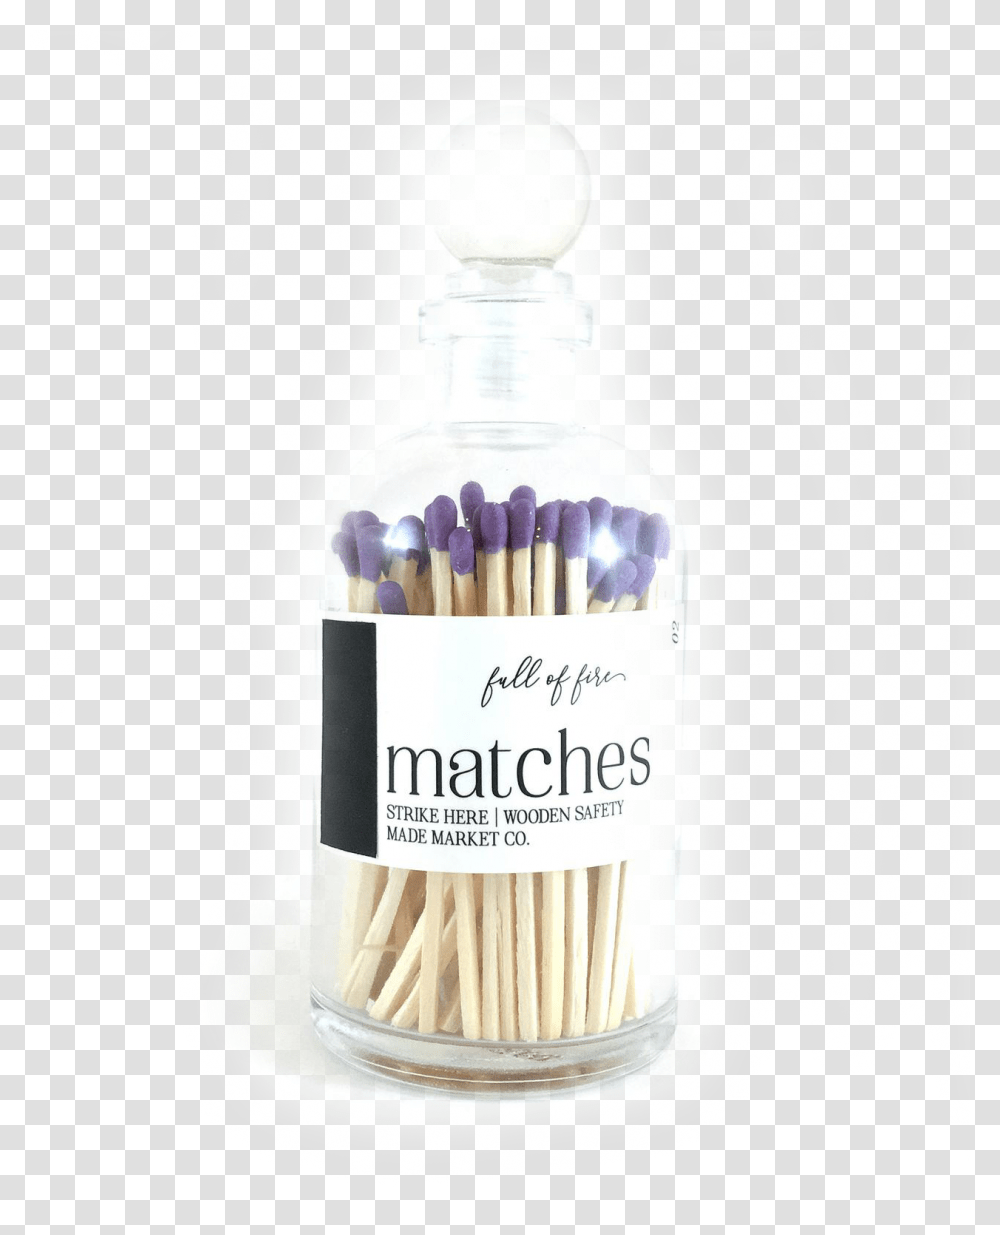 Made Market Co Light Your Way Matches Purple Cylinder, Cosmetics, Jar, Pencil, Label Transparent Png